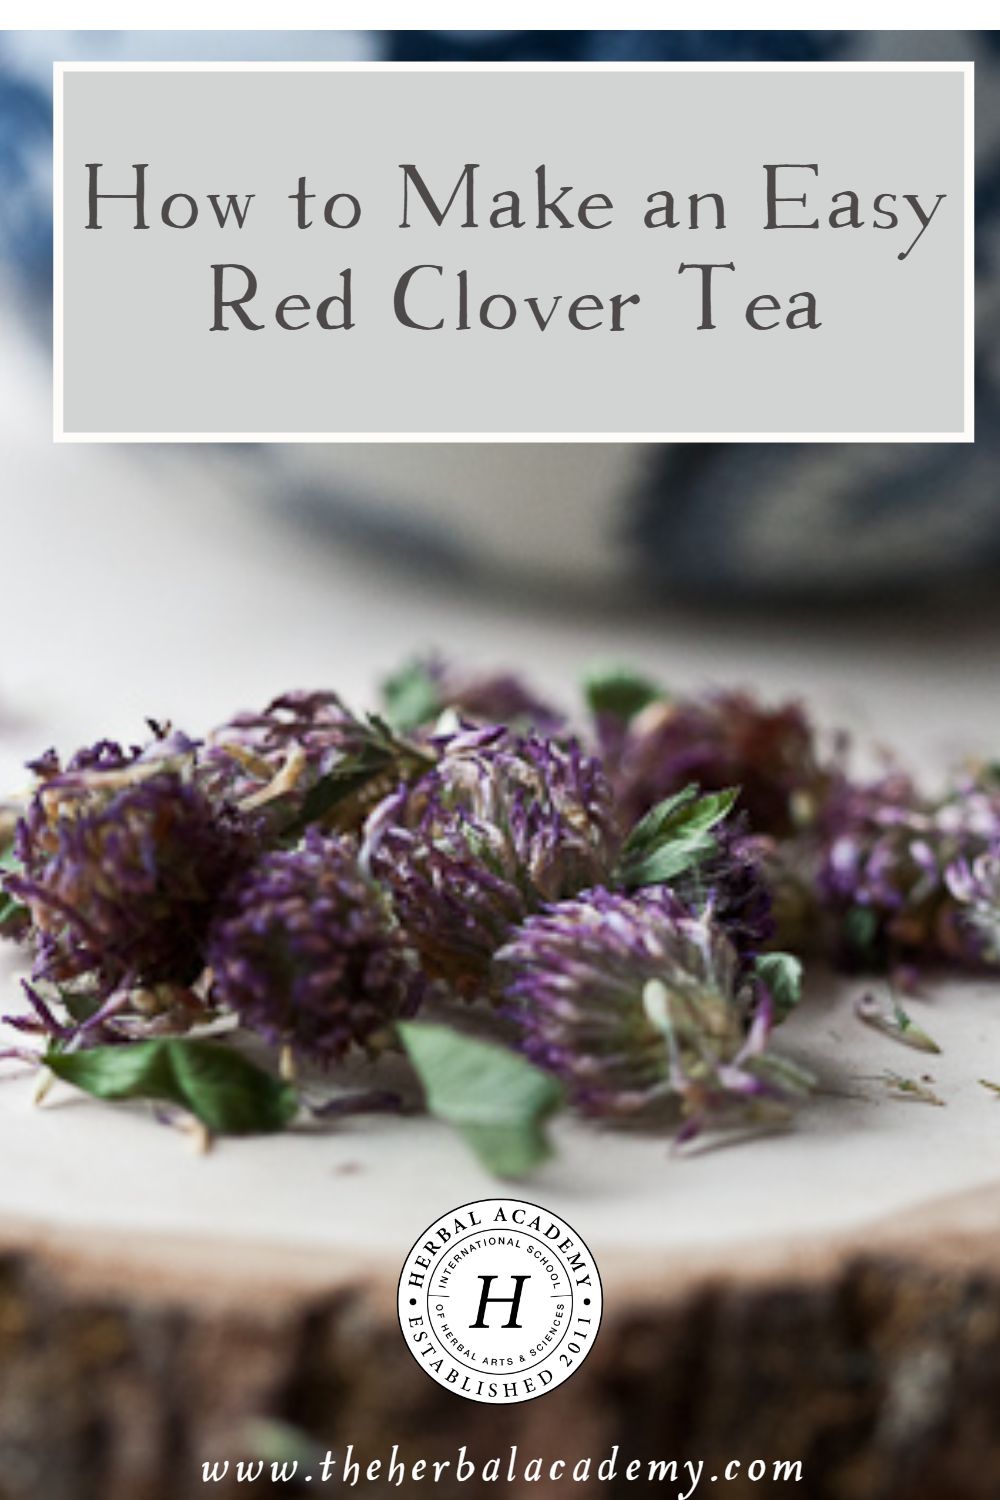 How to Make an Easy Red Clover Tea: Red Clover, Red Clover, Bring Good Health on Over | Herbal Academy | Red clover (Trifolium pratense) is a well-known “weed” commonly found in fields, roadsides, and in yards from May until September. Make red clover tea!